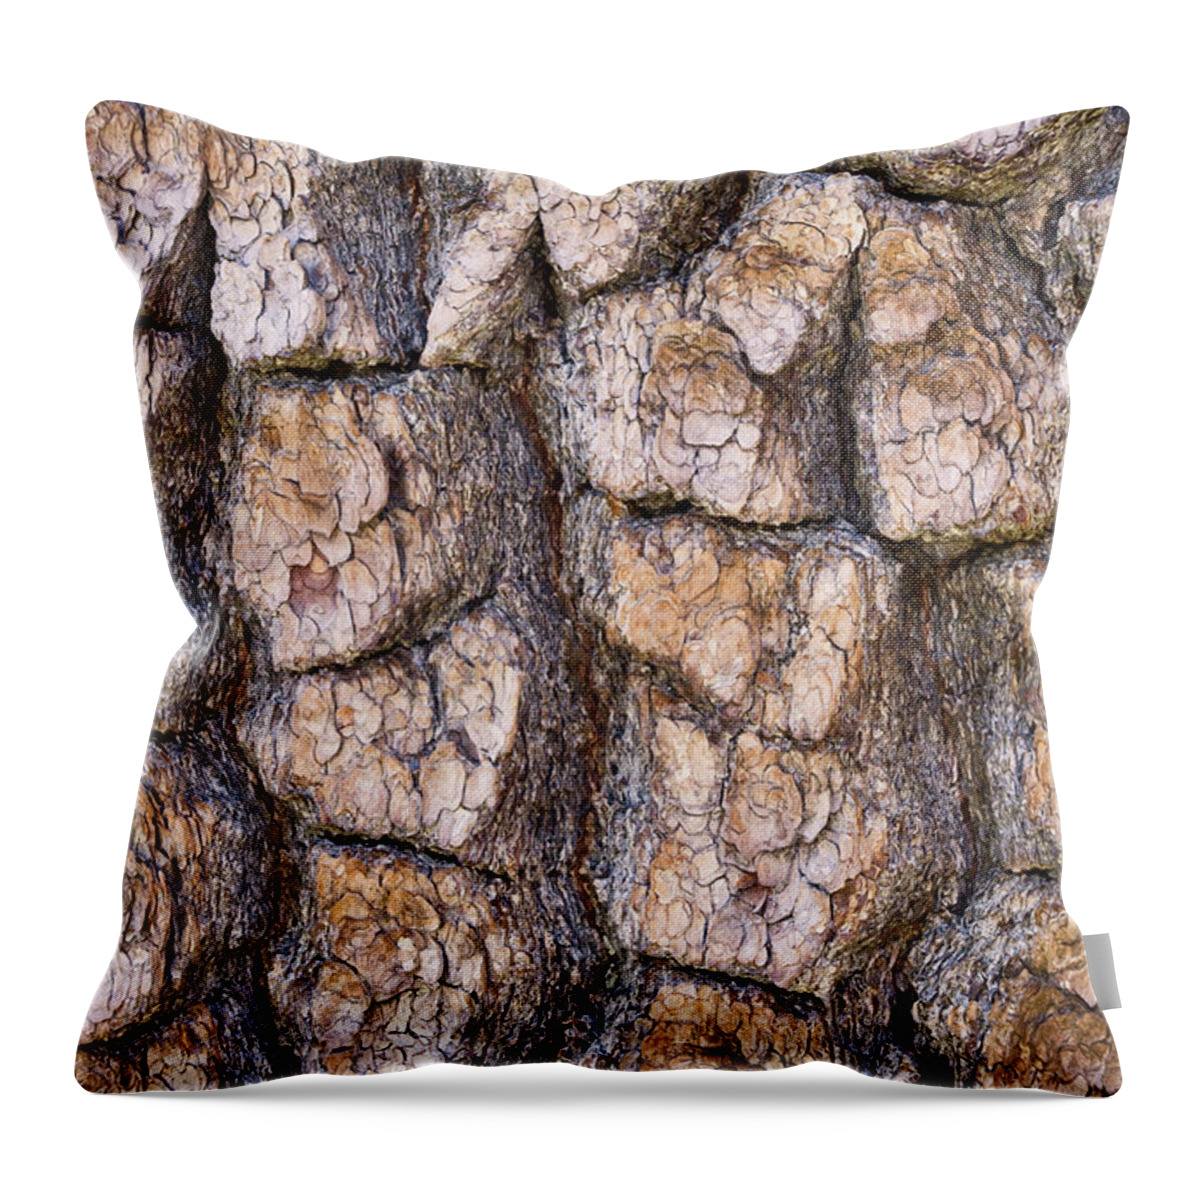 Natural Pattern Throw Pillow featuring the photograph Pine Bark Closeup by Donald E. Hall